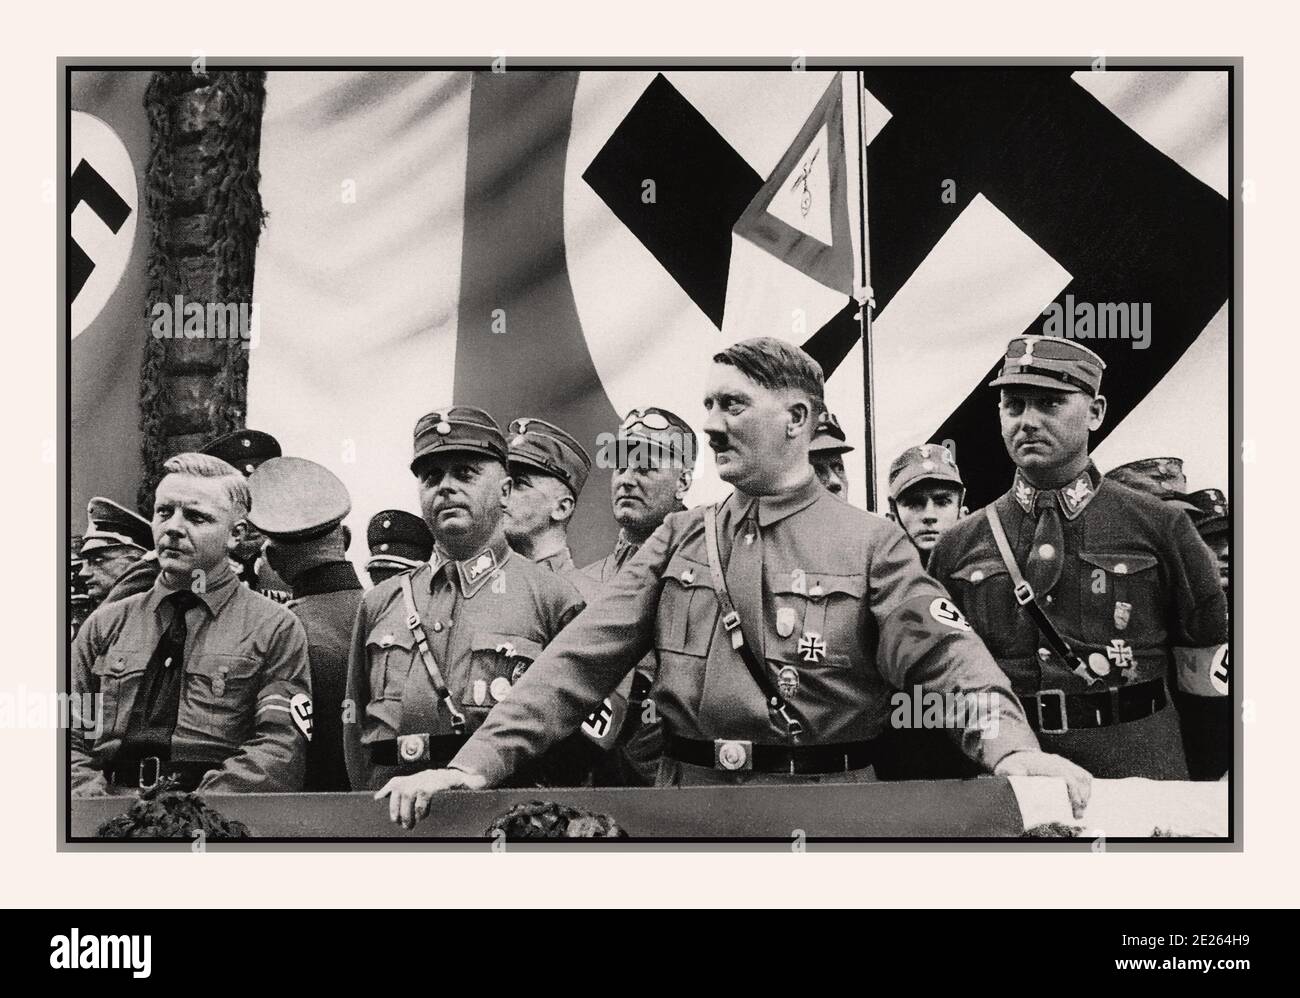 Archive 1930's Adolf Hitler in uniform wearing swastika armband at a political rally. with NSDAP members 1930s, Dortmund, Germany with large Swastika Flag as background Stock Photo